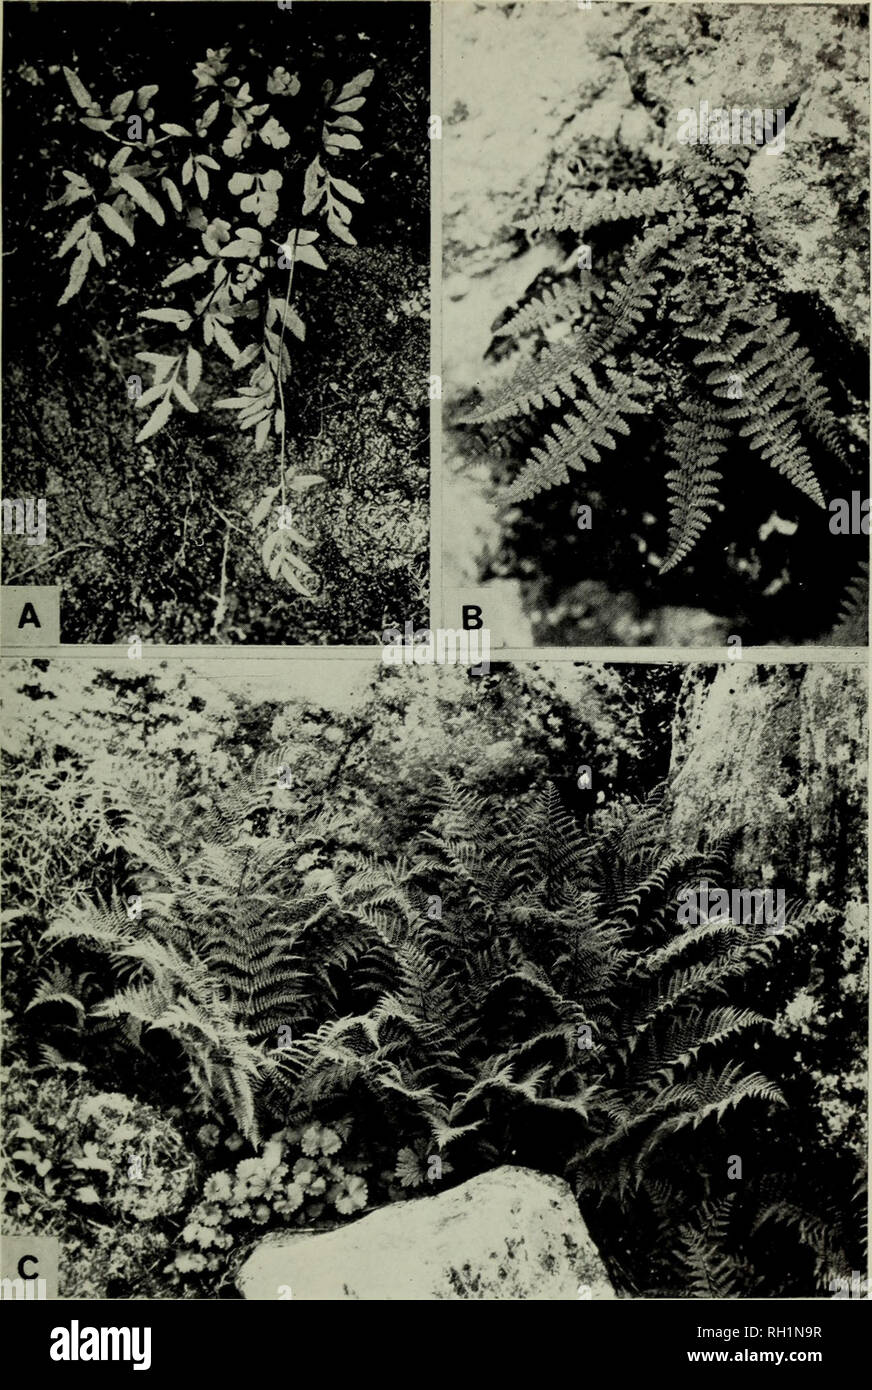 . The British fern gazette. Ferns. RIT. FERNGAZ. 10(3) 1970 PLATE XIII. PLATE XIII—Some ferns of the alpine region. A: Cryptogramma stelleri. Yatsugatake, Nagano prefecture, Honshu, c. one-third natural size. B: Dryopteris fragrans var. remotiuscula. Yatsugatake, Nagano prefecture, Honshu. Mt Shirouma, Nagano prefecture, Honshu, by Prof. H. Takeda. facing page 134 c. one-quarter natural size, c. one-twelfth natural size. C: A thy Hum alpestre. All photographs taken. Please note that these images are extracted from scanned page images that may have been digitally enhanced for readability - colo Stock Photo